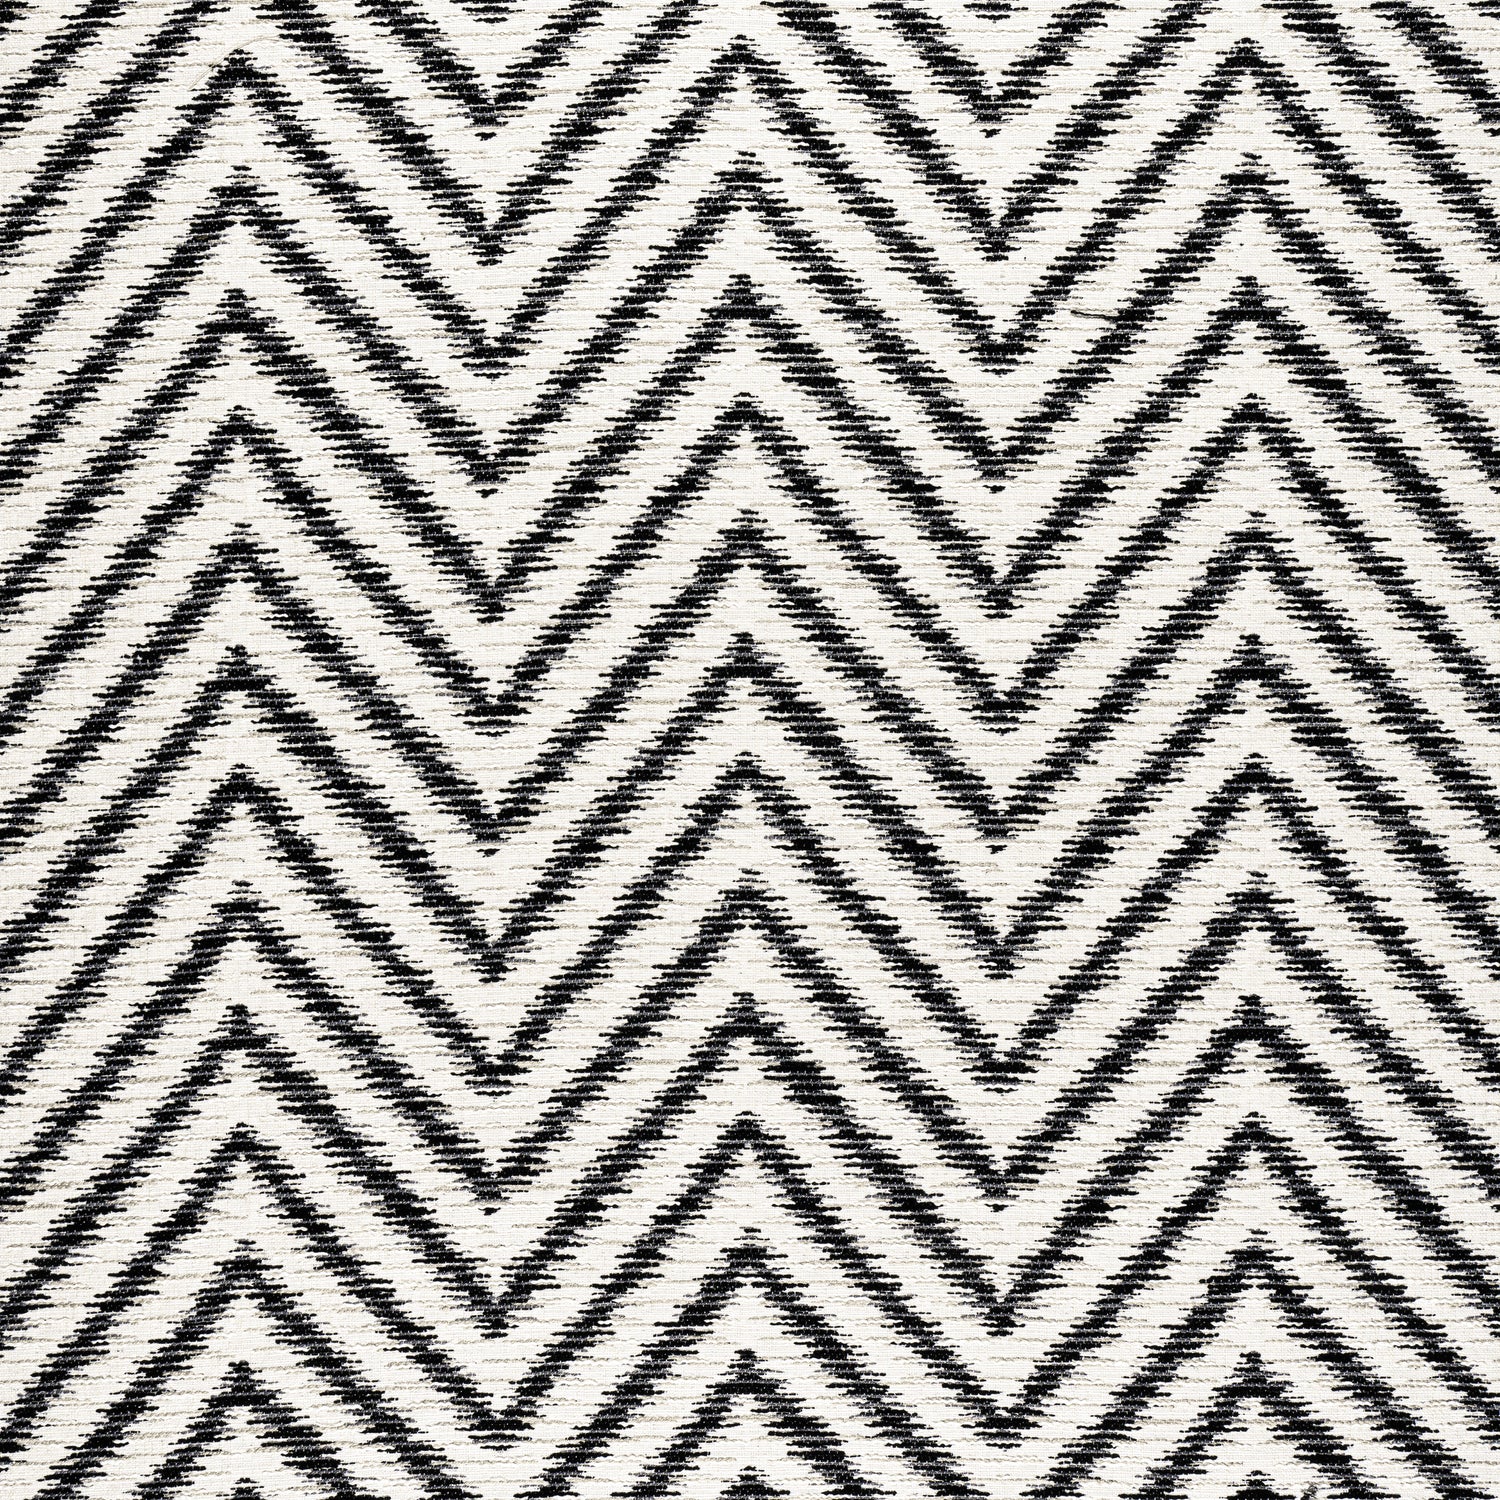 Aliso fabric in onyx color - pattern number W8823 - by Thibaut in the Haven collection